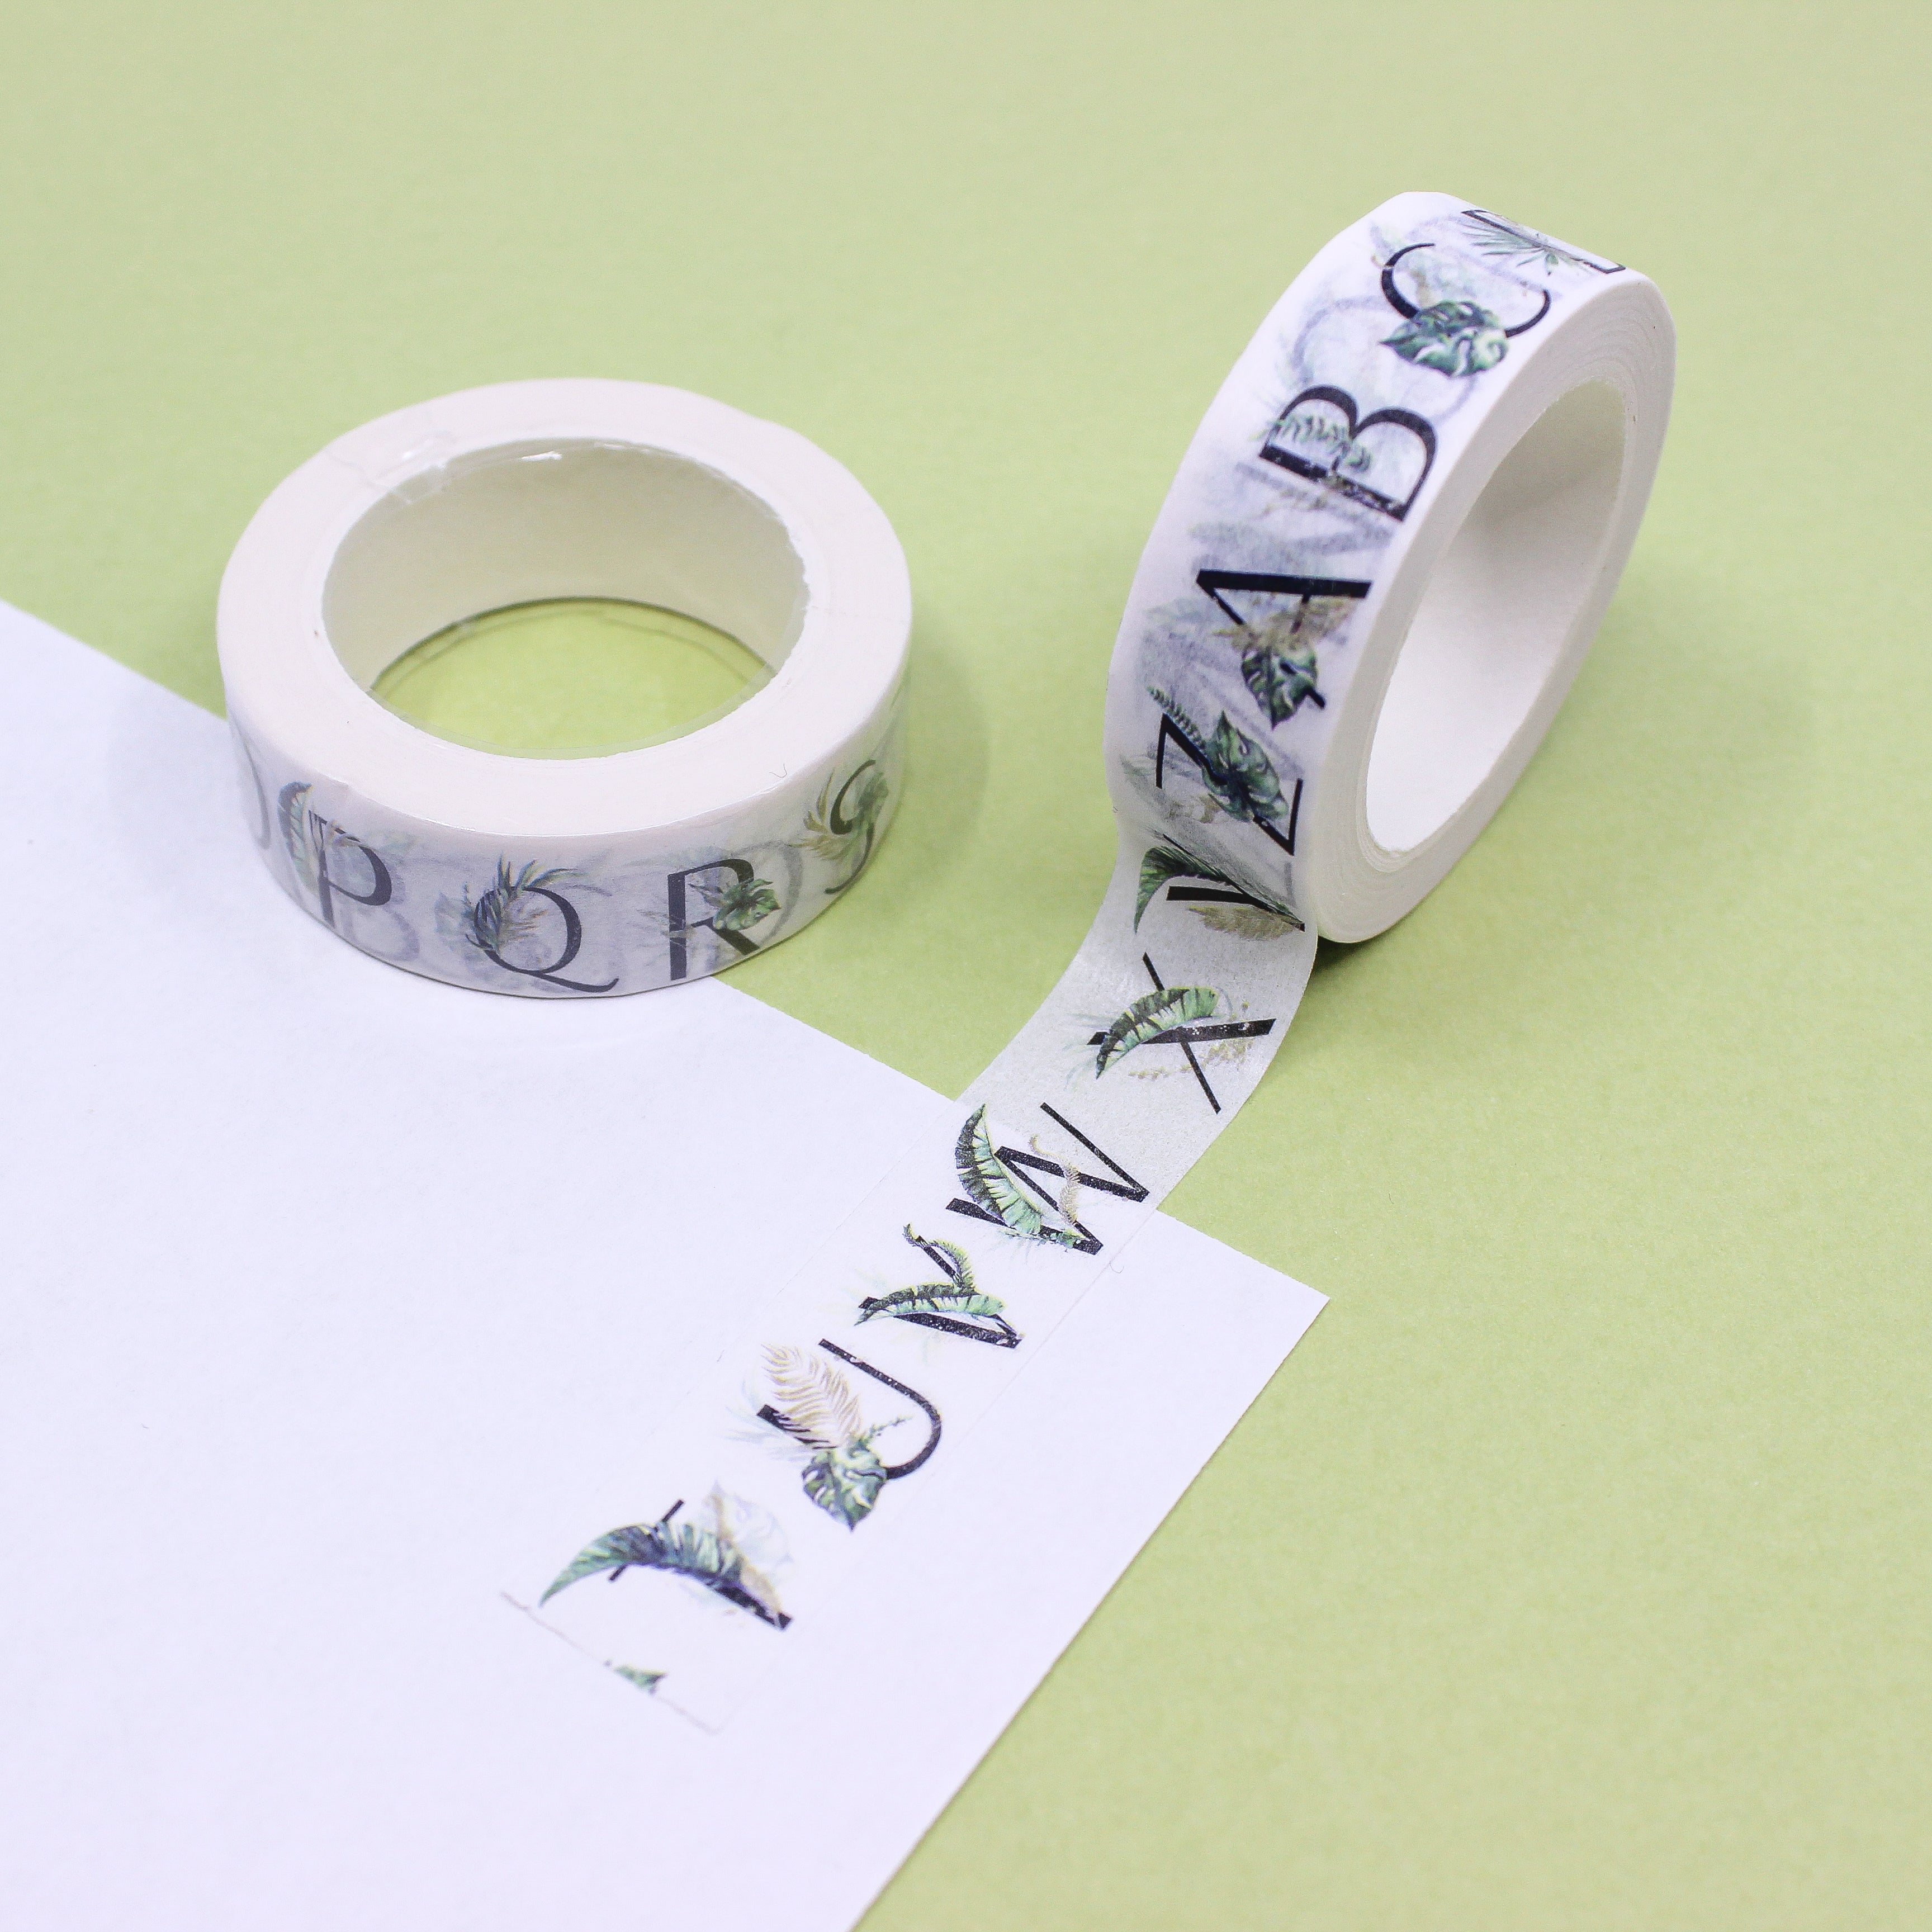 This is a botanical letters themed washi tape from BBB Supplies Craft Shop